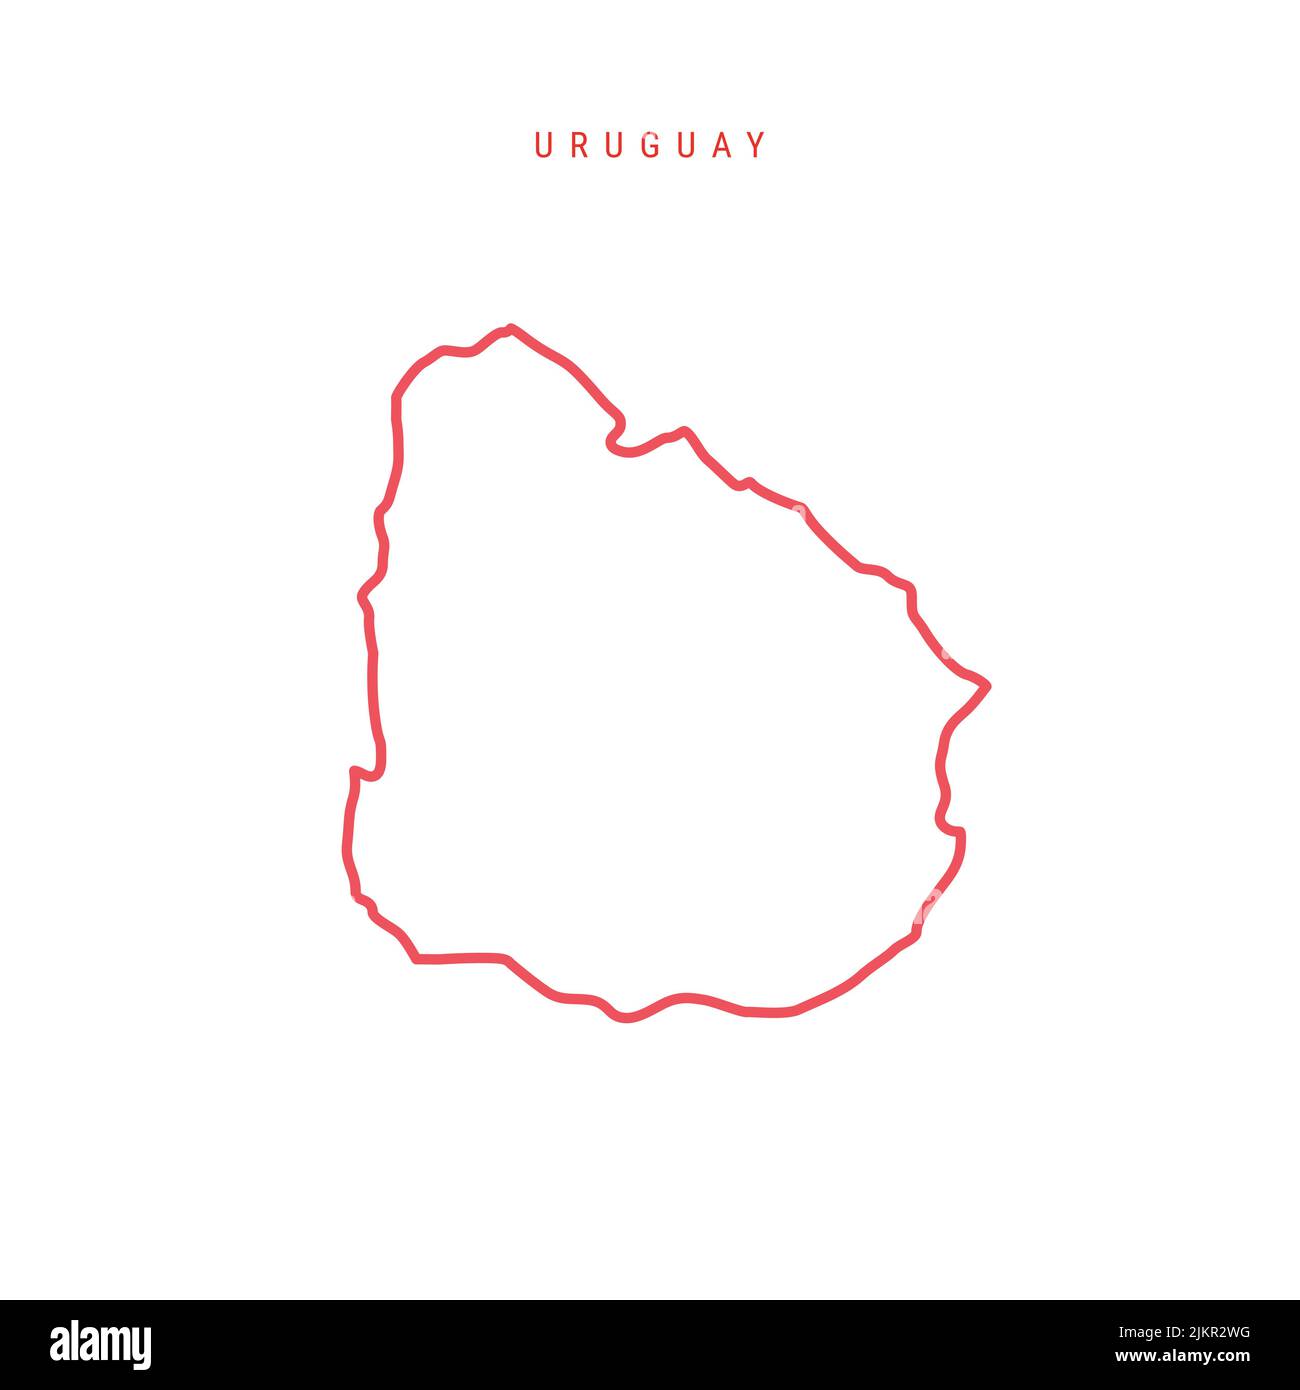 Uruguay editable outline map. Uruguayan red border. Country name. Adjust line weight. Change to any color. Vector illustration. Stock Vector